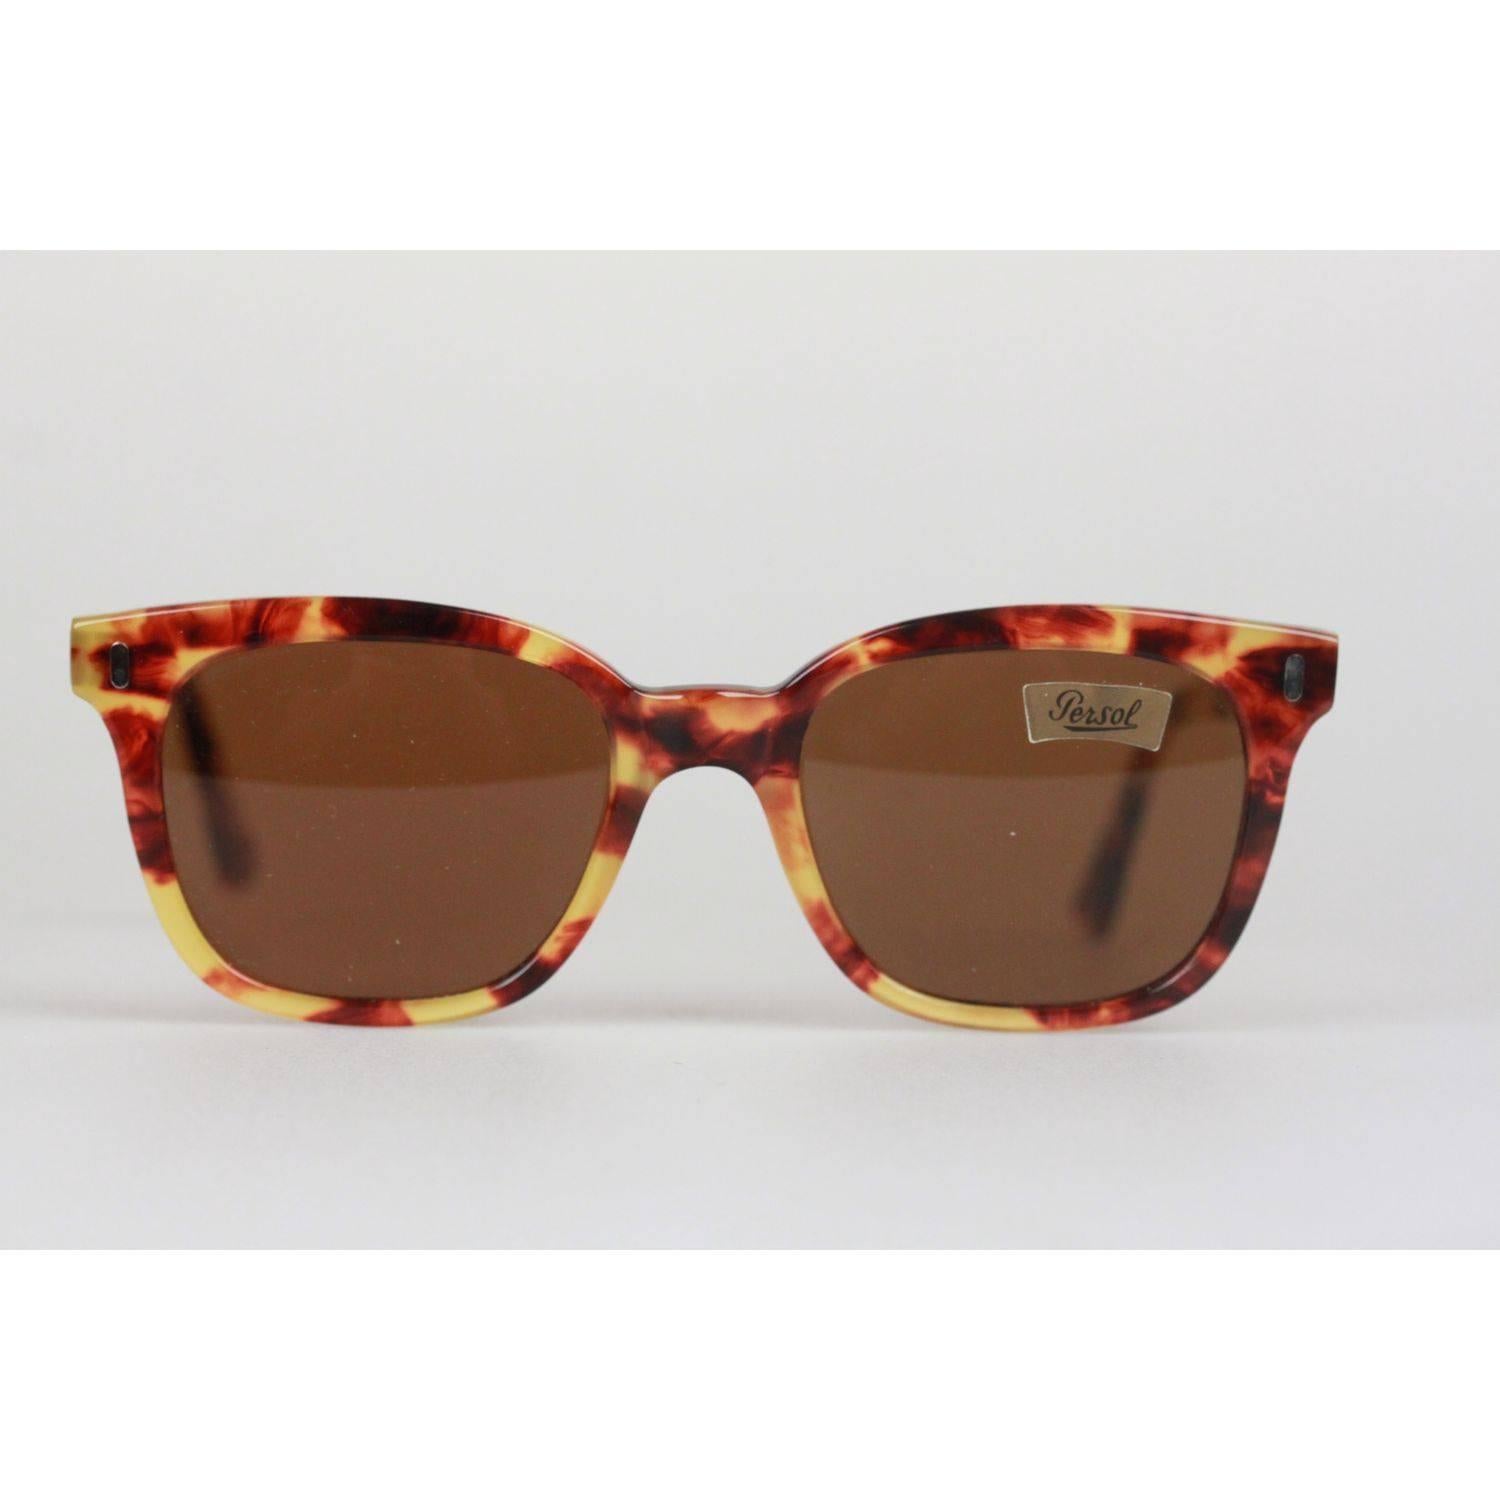 - Unisex designer shades by Persol Ratti , mod. 9231, from Italy
- Period/Era: 1980s NOS
- Model: 9231-50 - 147 - 52 - Made in Italy
- Brown tortoise frame 
- Original 100% UV protection brown lenses (PERSOL logo on both lenses)
- Flexible temple